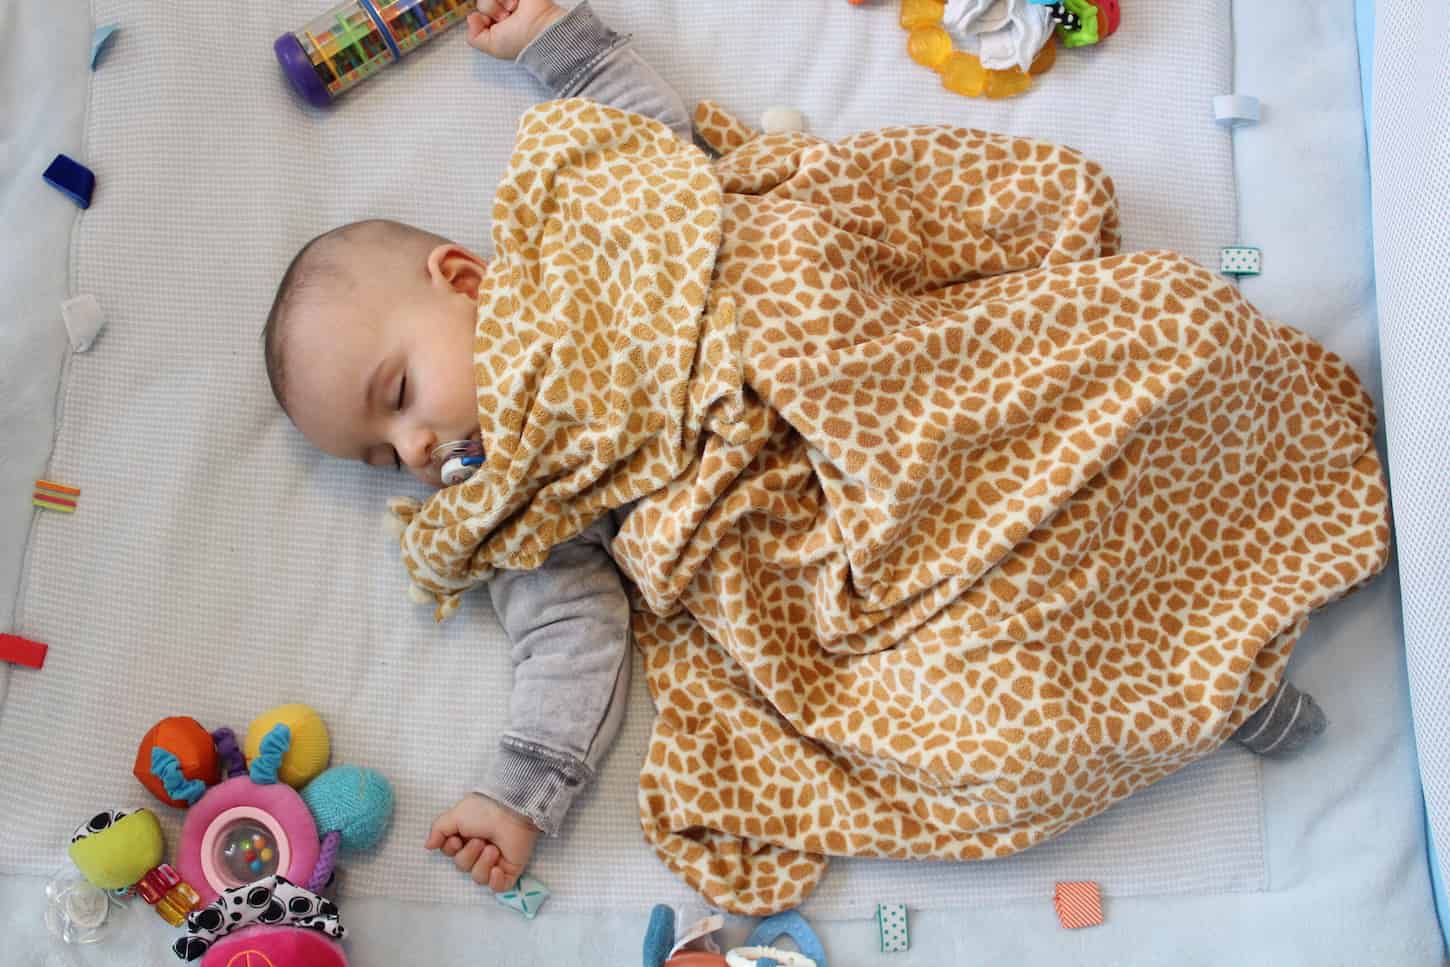 An image of a Sleeping baby boy in the playpen with a blanket and pacifier in his mouth.